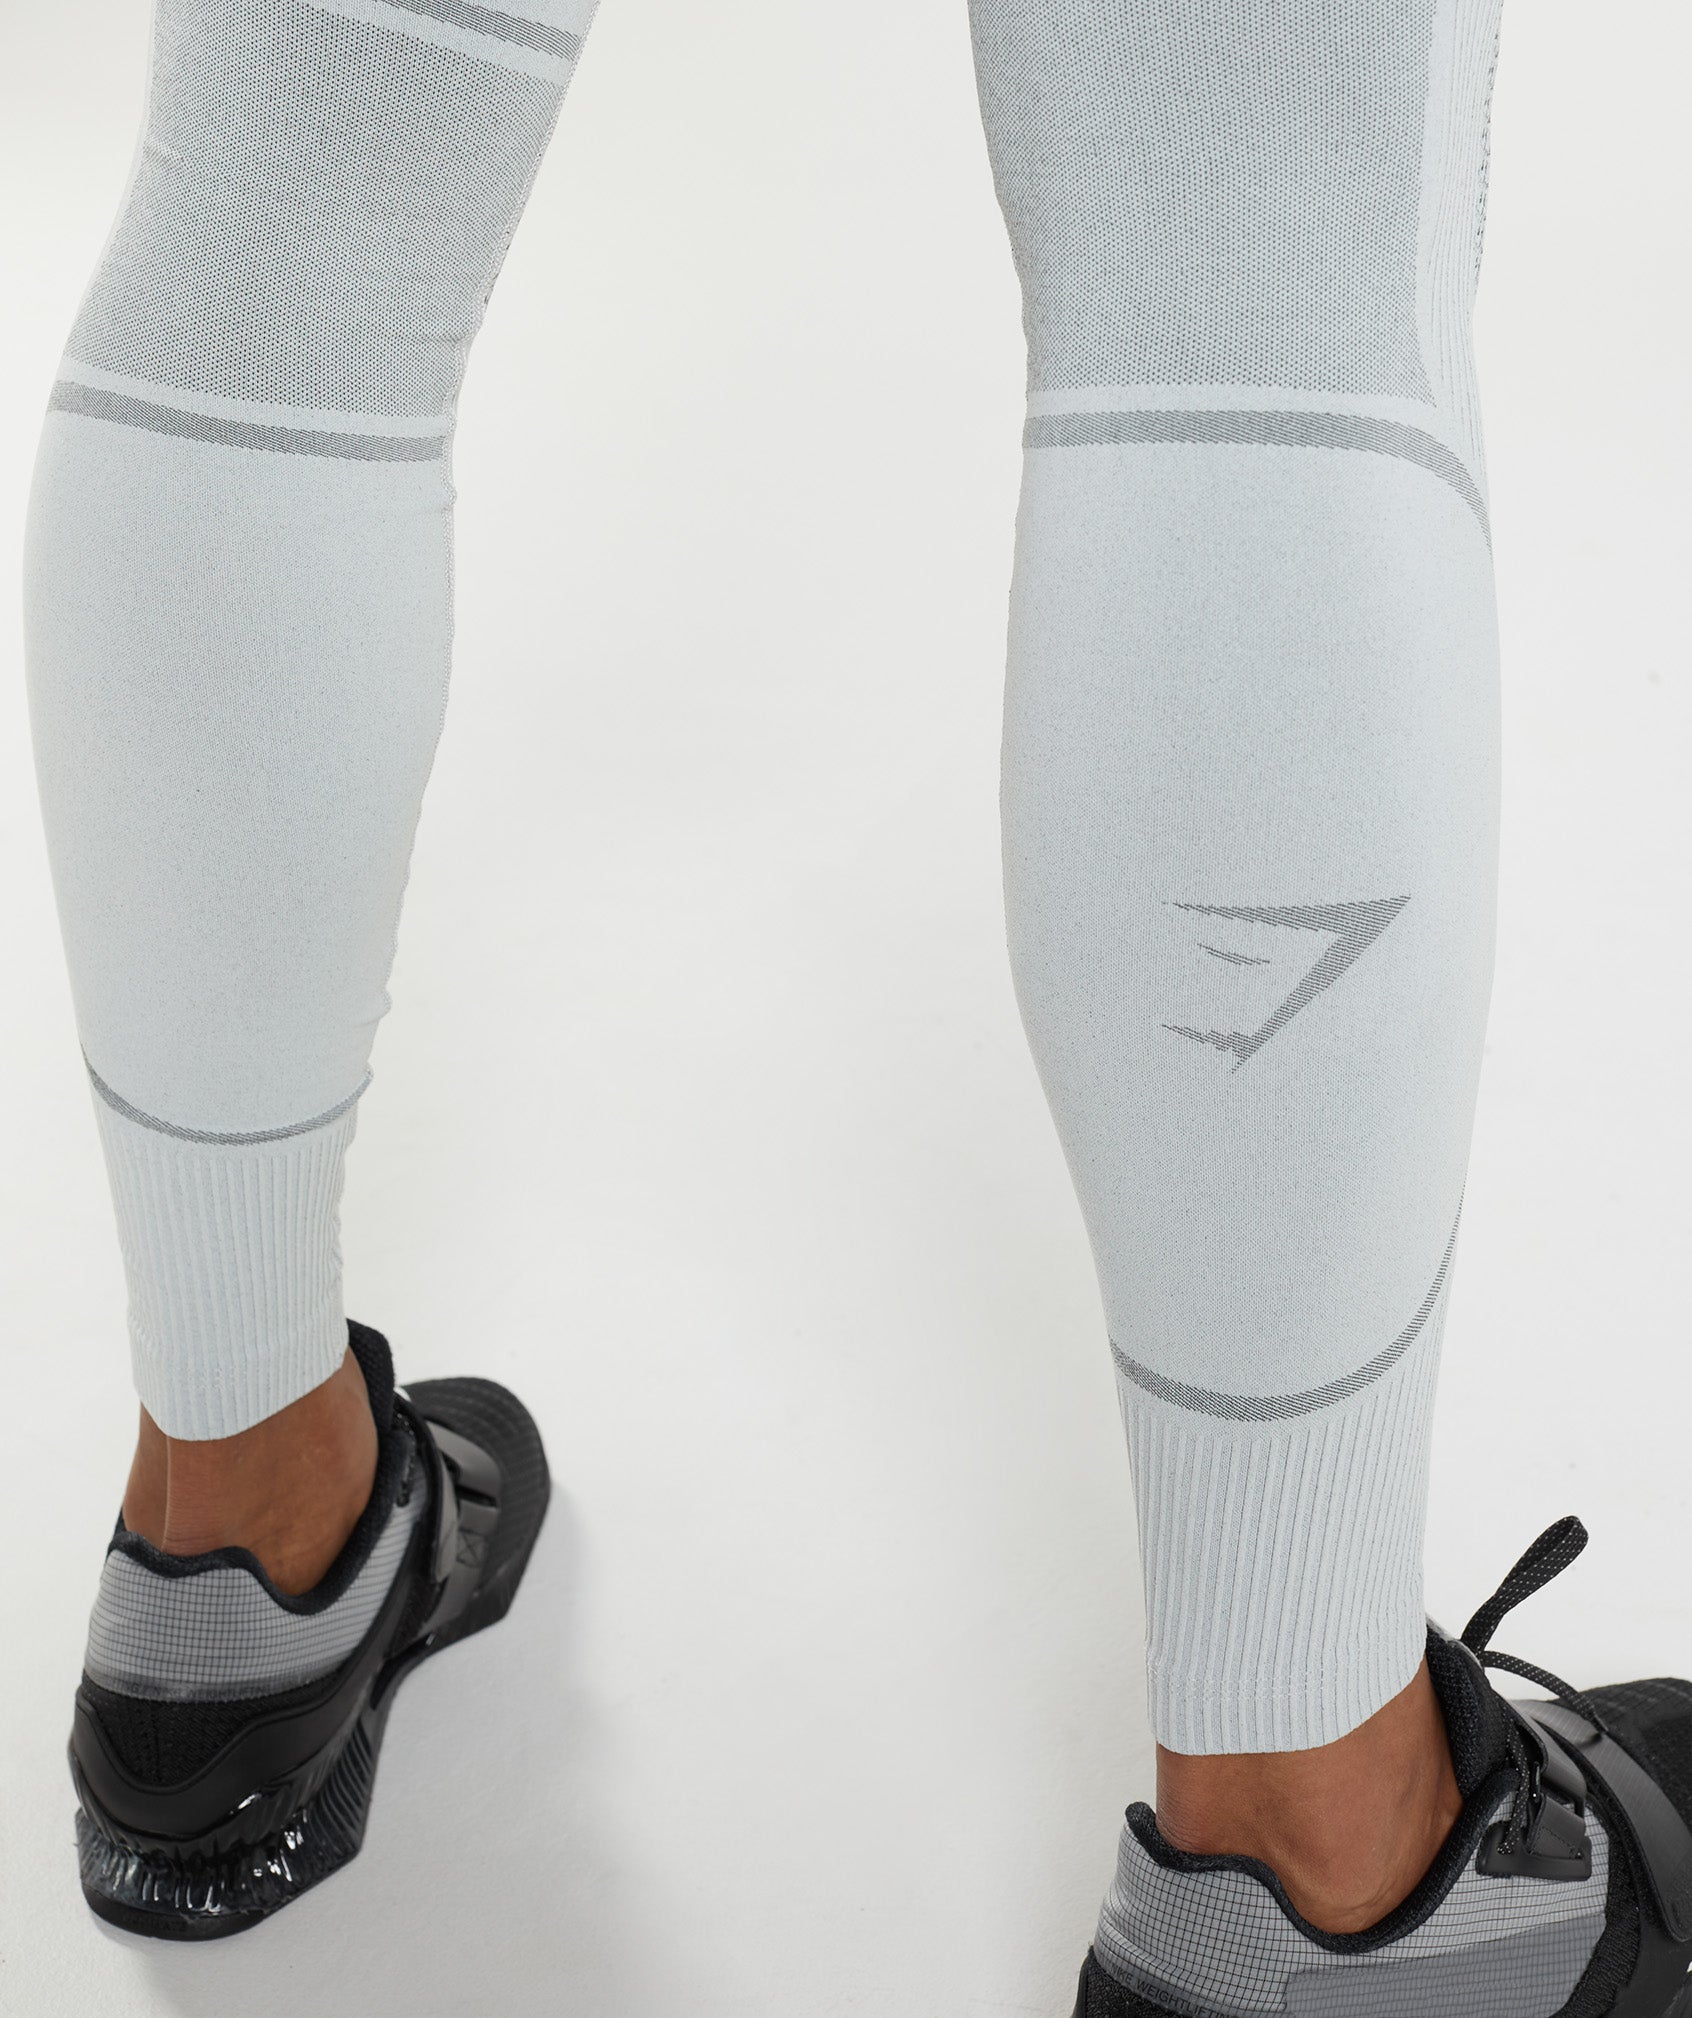 315 Seamless Tights in Light Grey/Charcoal Grey - view 5